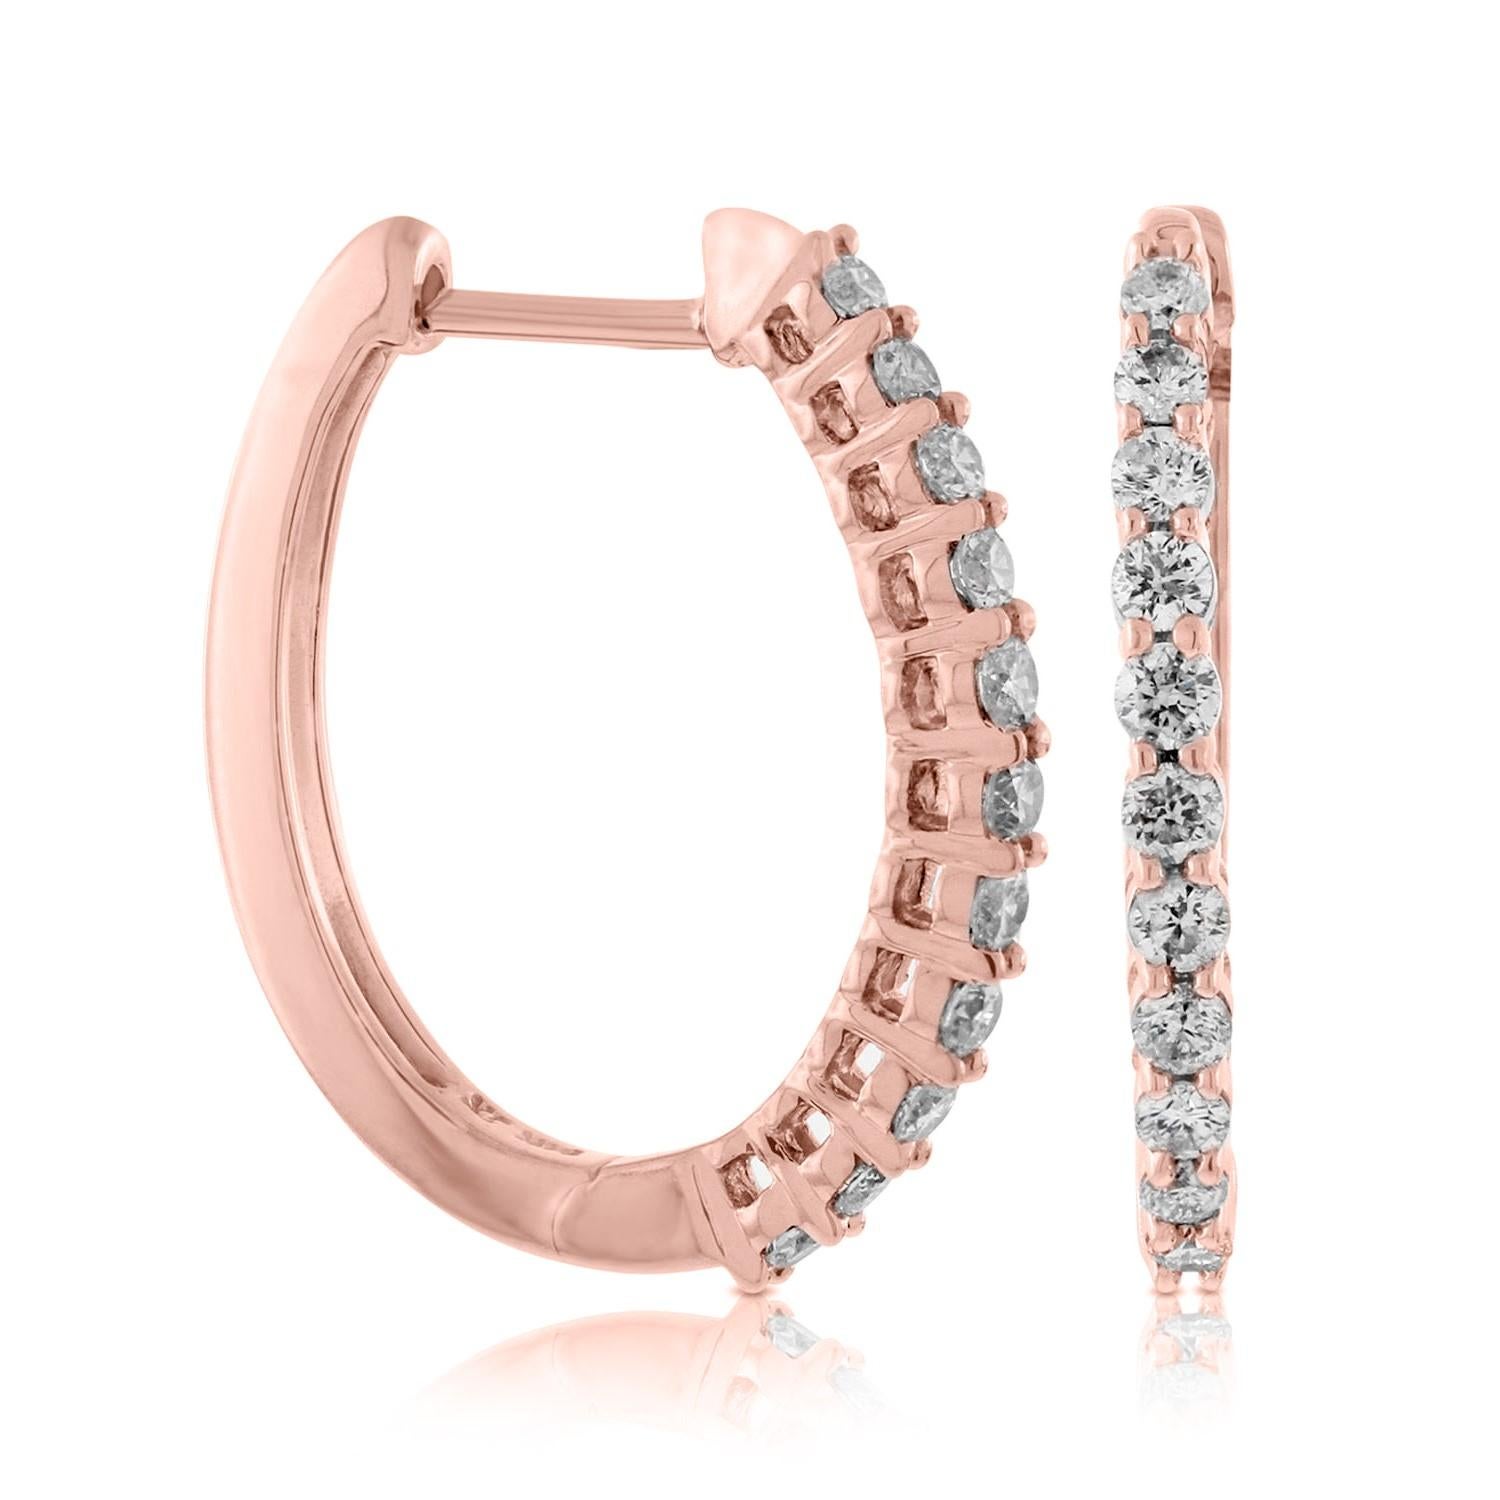 Nothing says luxury like an incredible pair of diamond round hoop earrings. These stunning brightly polished 14 karat rose gold round-shaped hoop earrings feature a total of 26 round brilliant cut diamonds totaling .75 carats are prong set on the